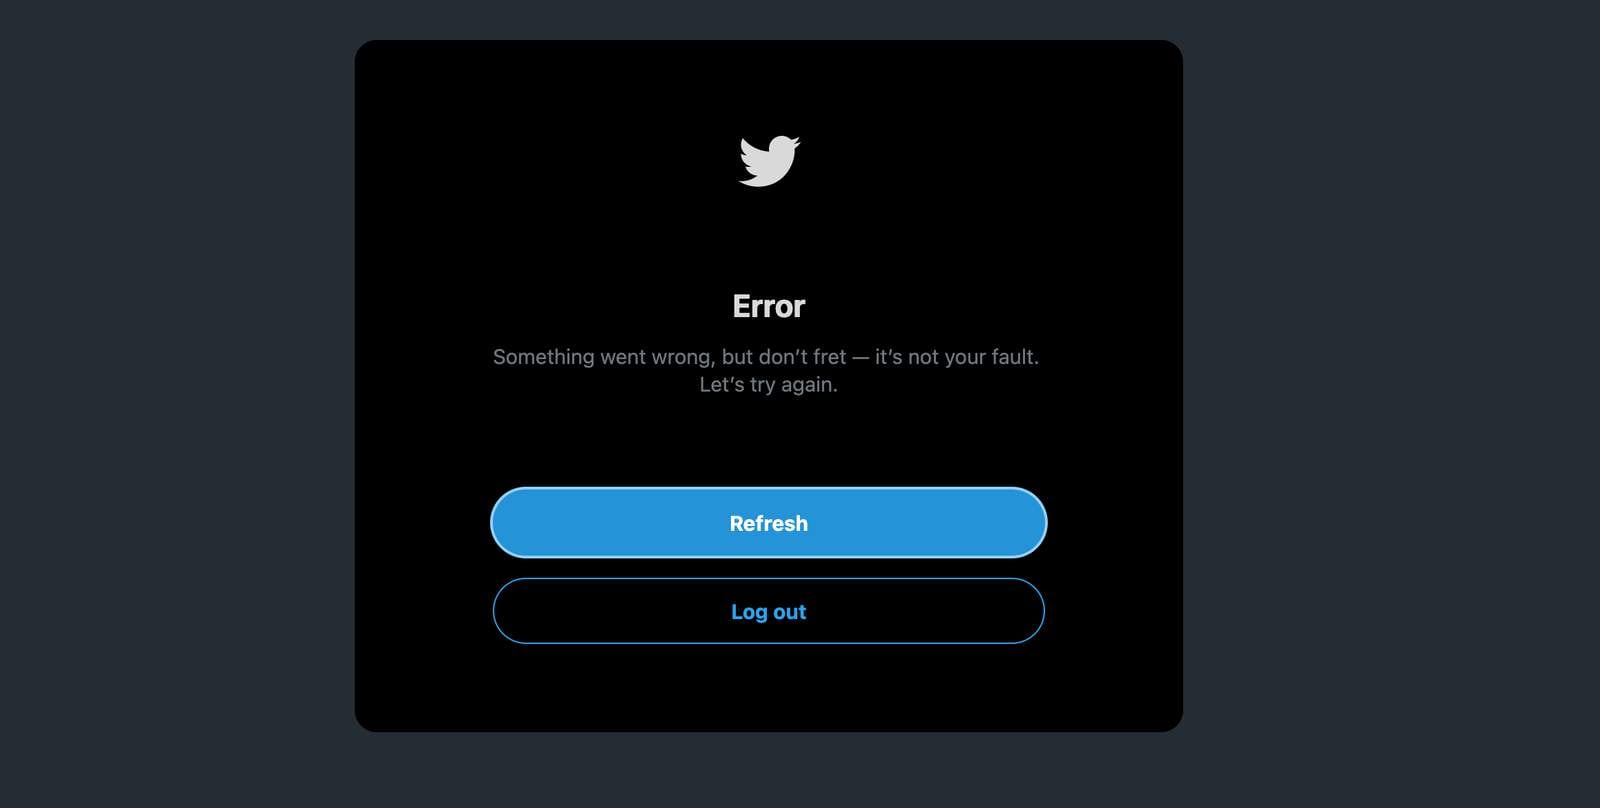 Twitter users experiencing login errors: ‘It’s not your fault’